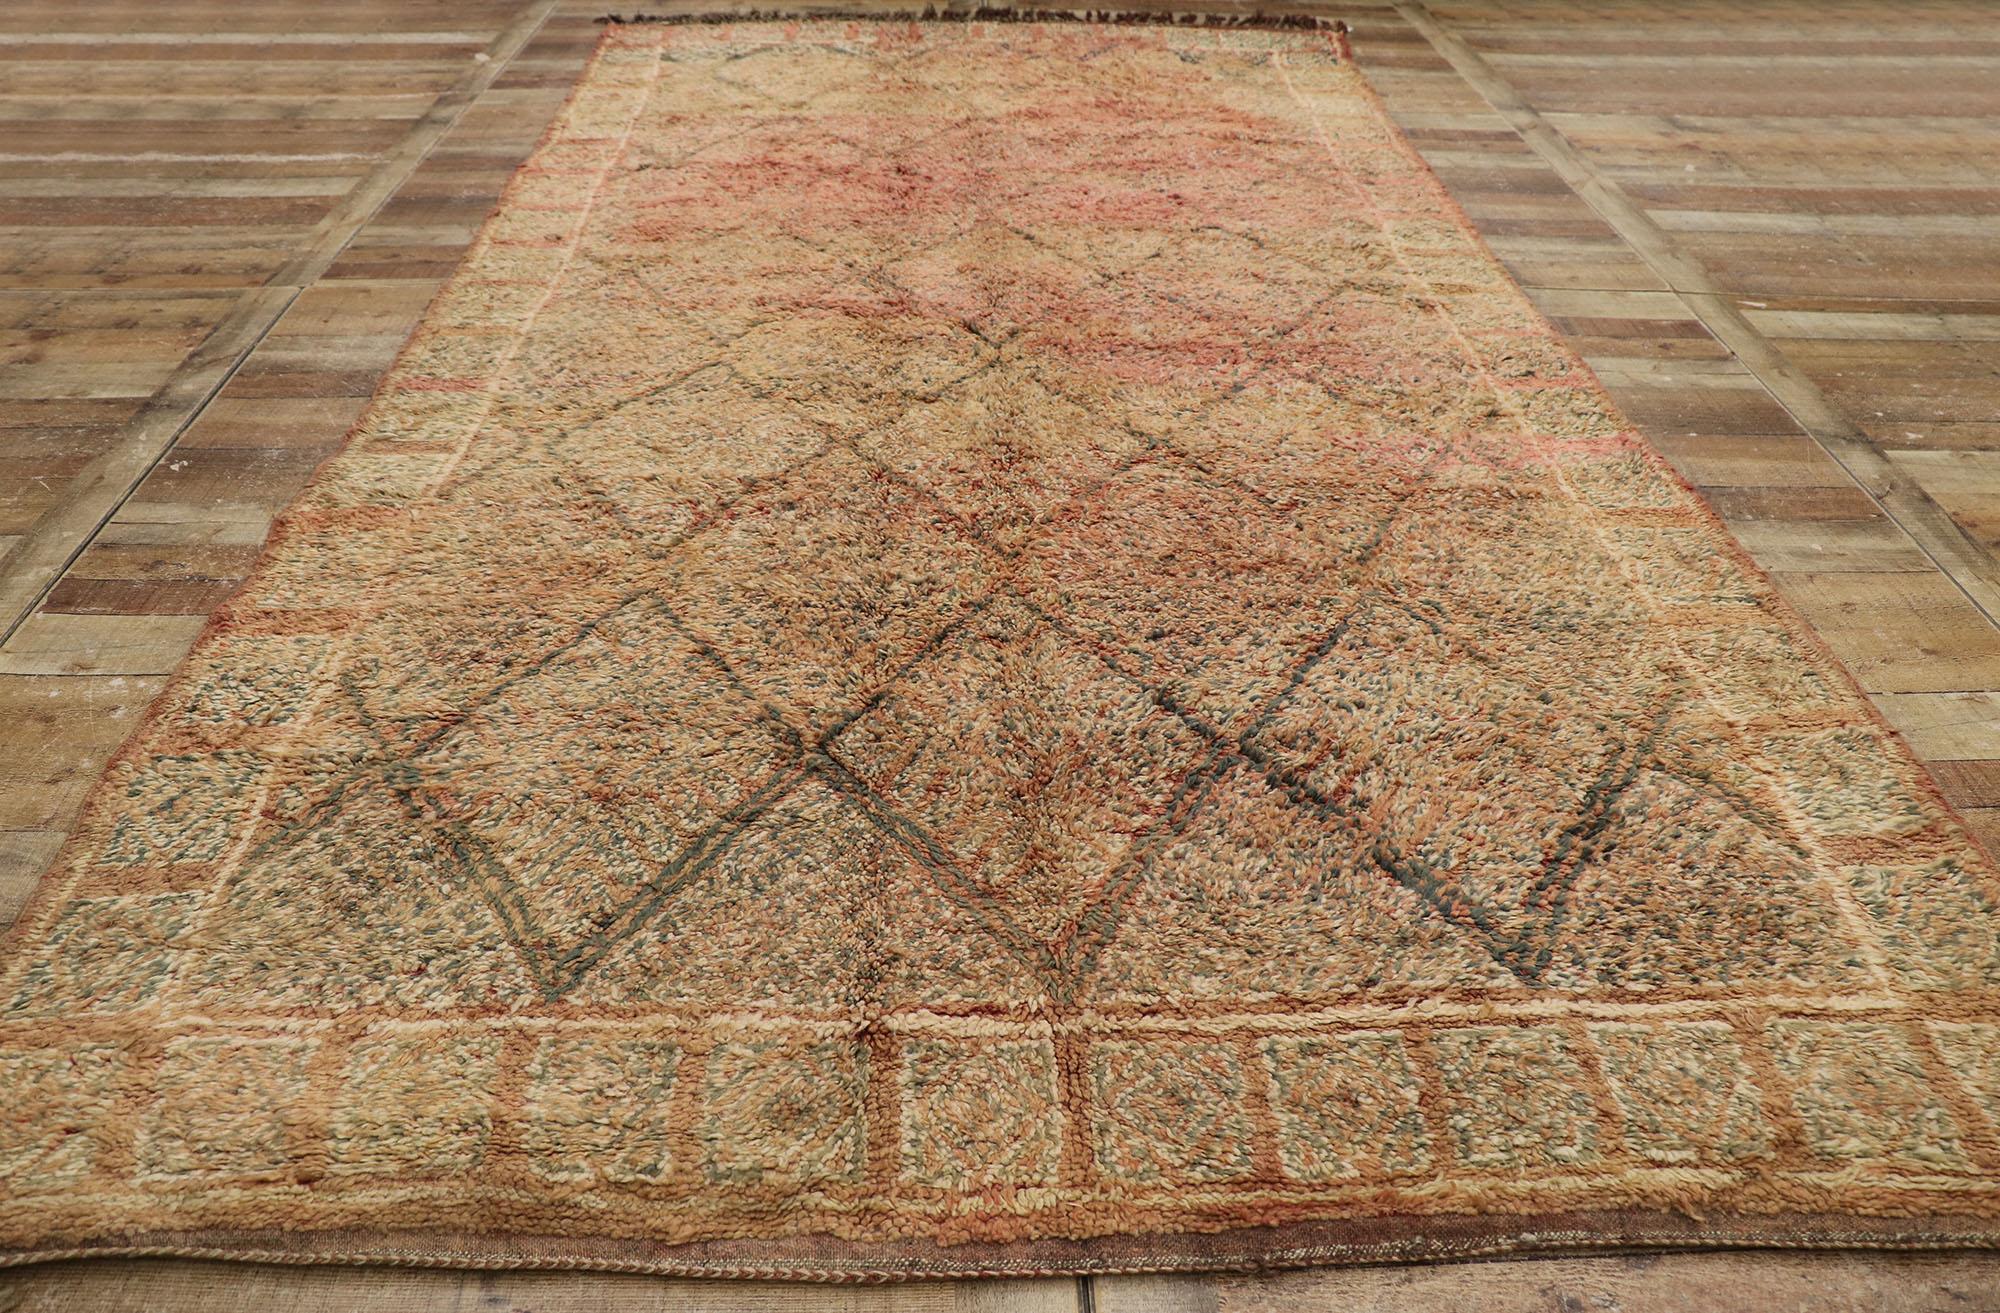 Wool Vintage Berber Zayane Moroccan Rug with Modern Rustic Style For Sale